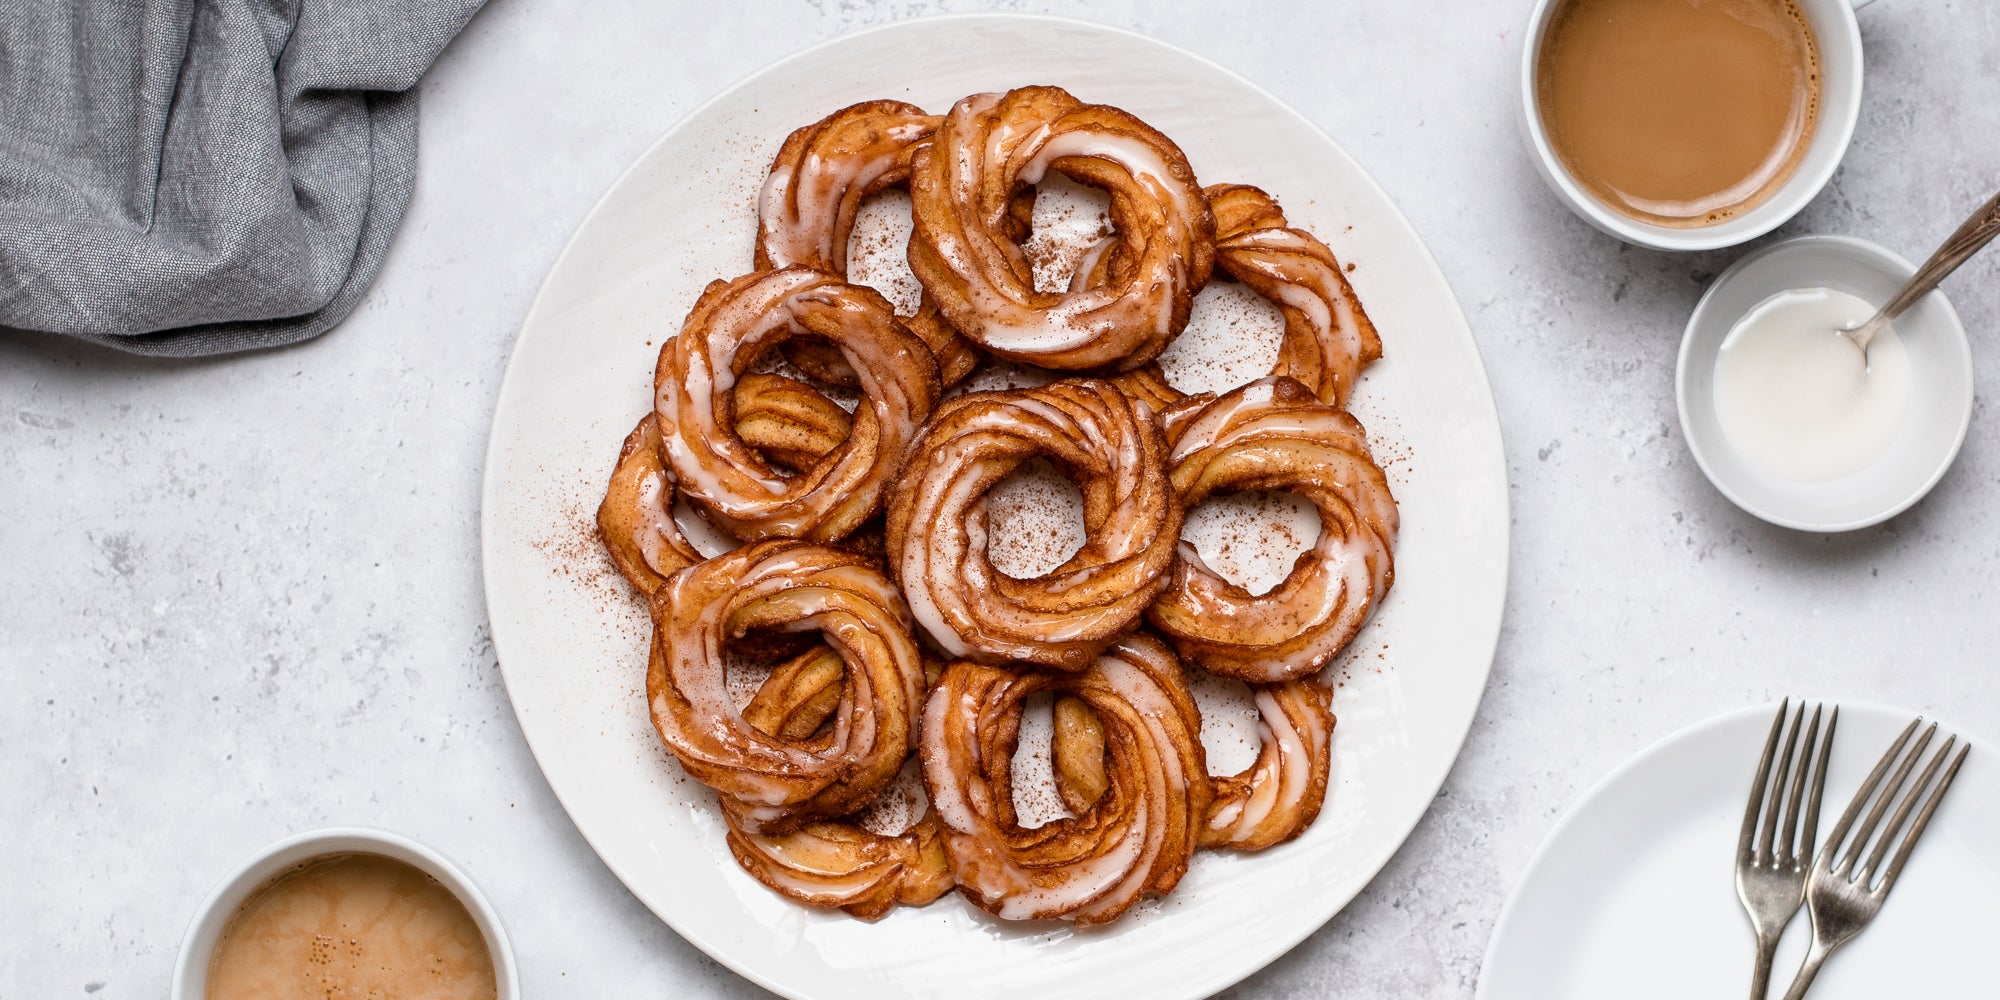 Top view of Apple Cider Crullers on a plate, drizzled with icing and dusted with cinnamon